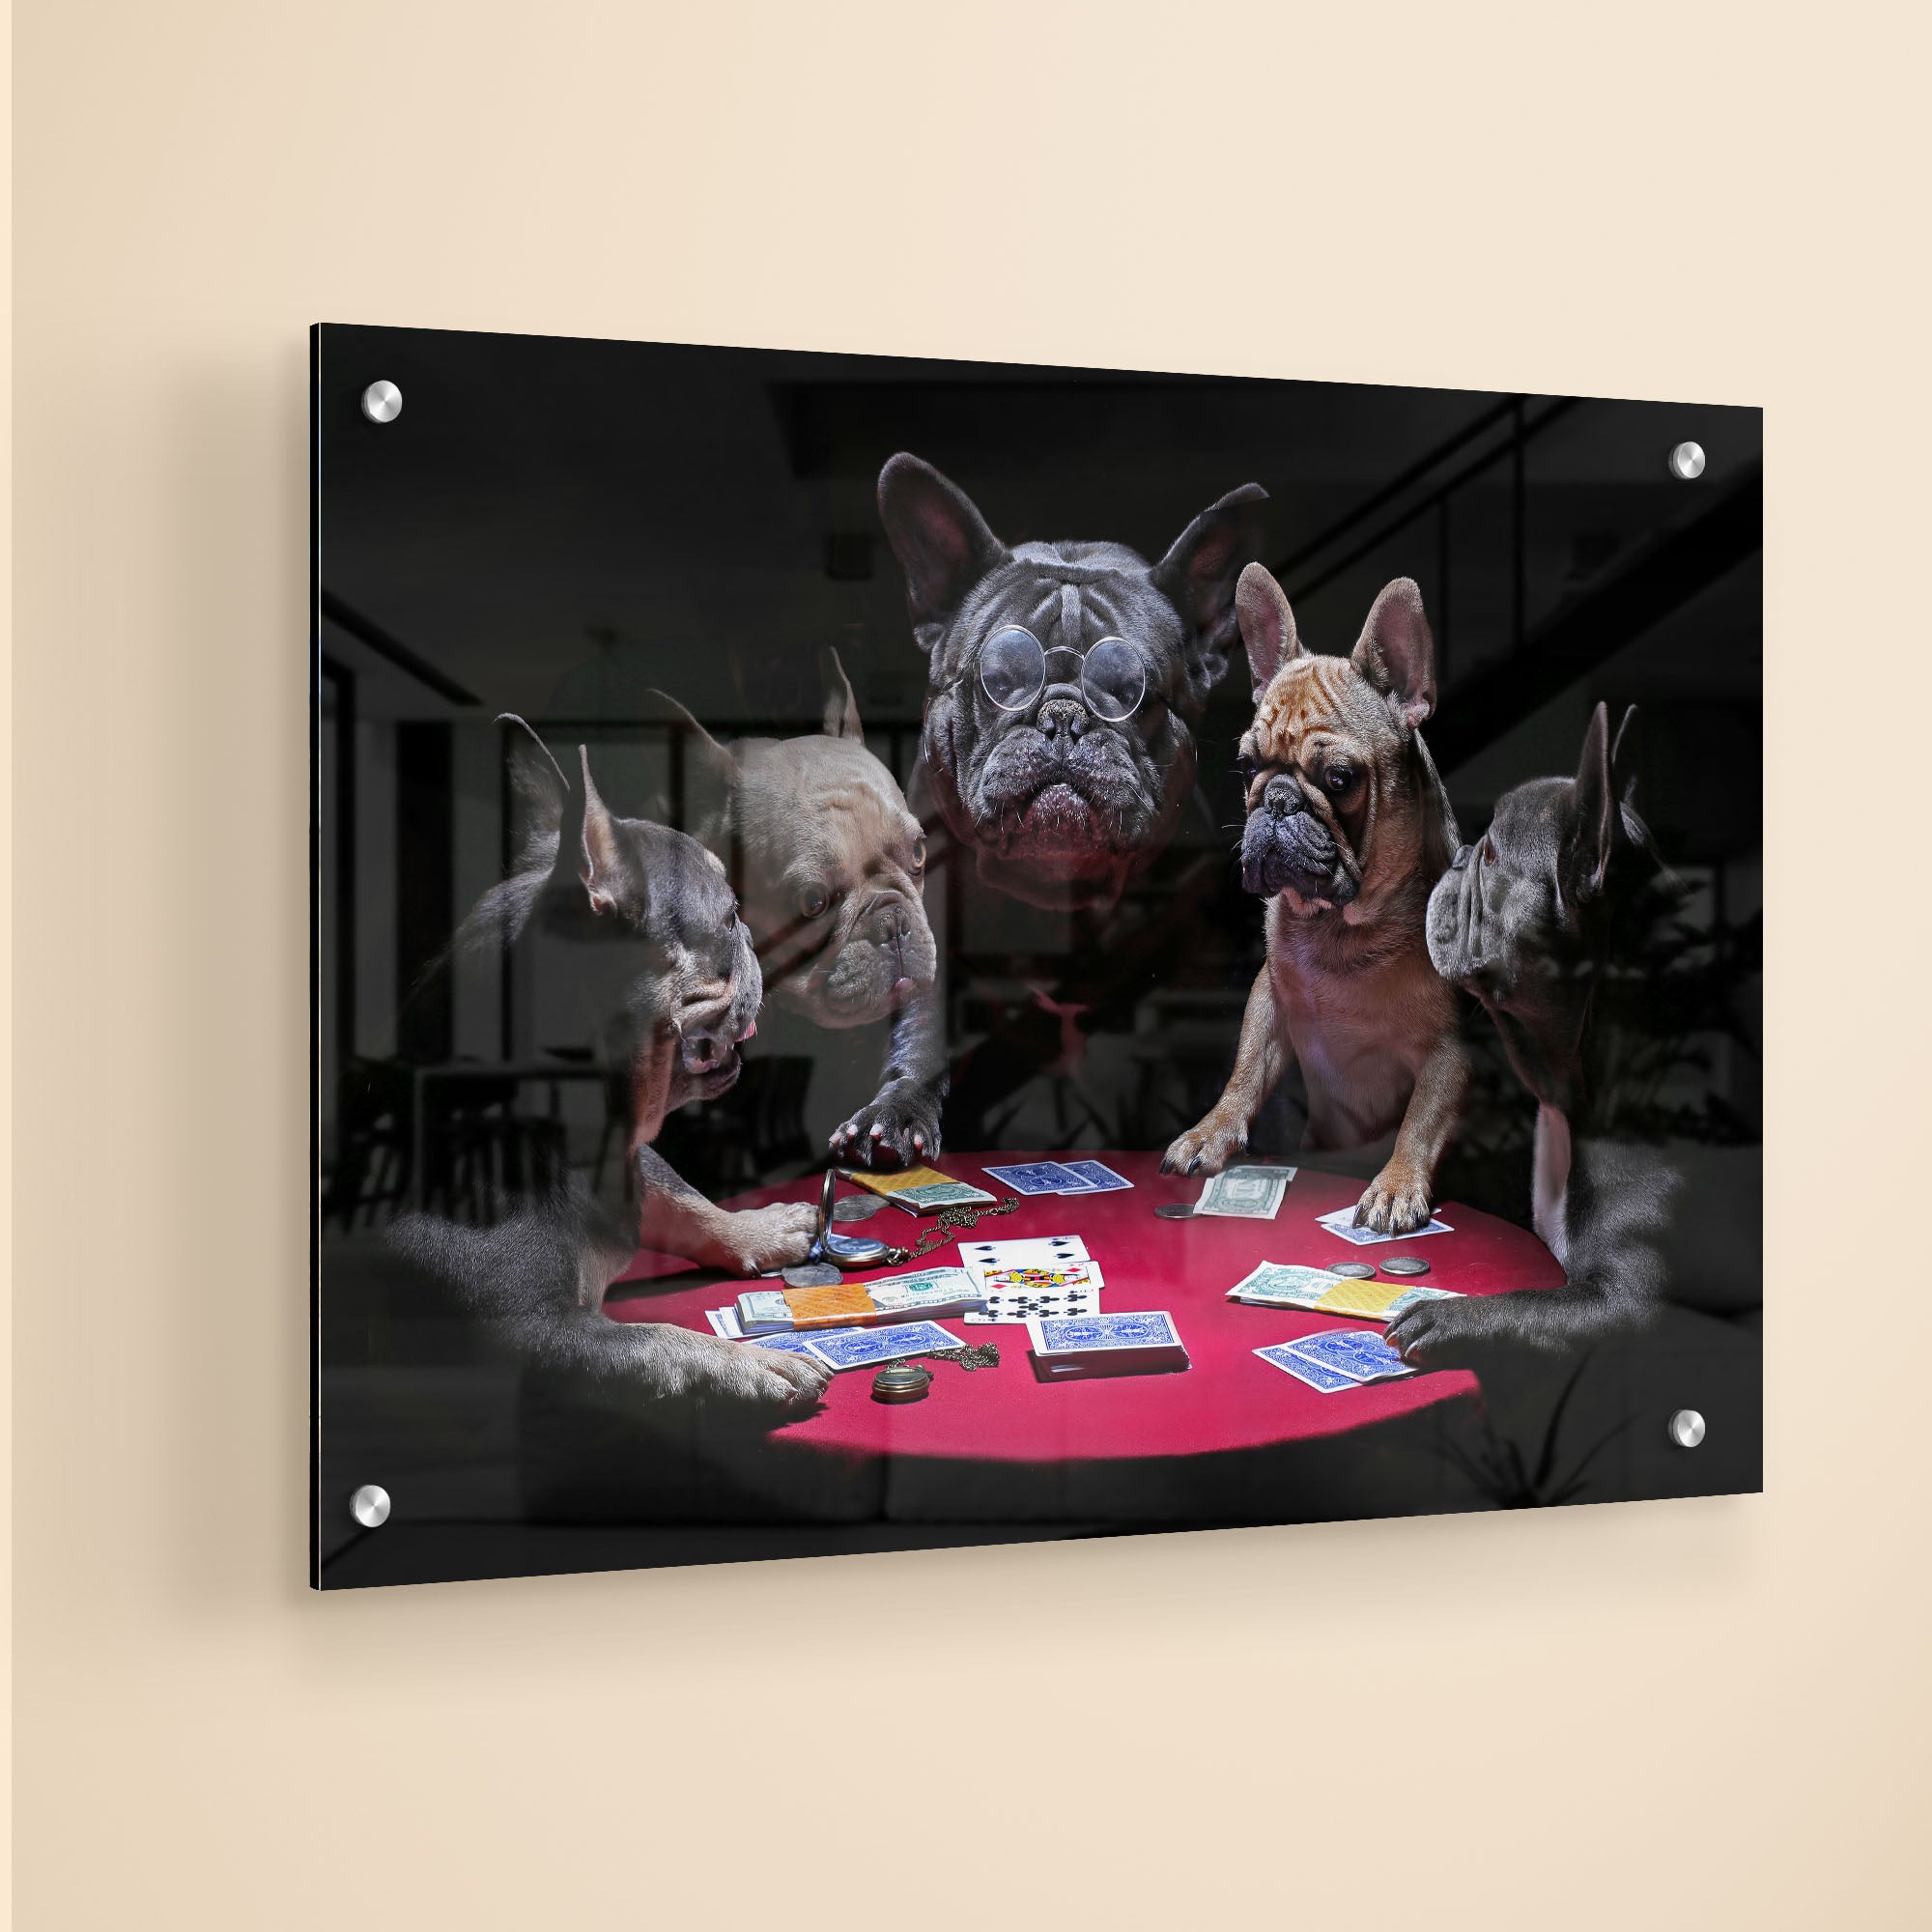 Dogs Playing Cards Acrylic Wall Painting